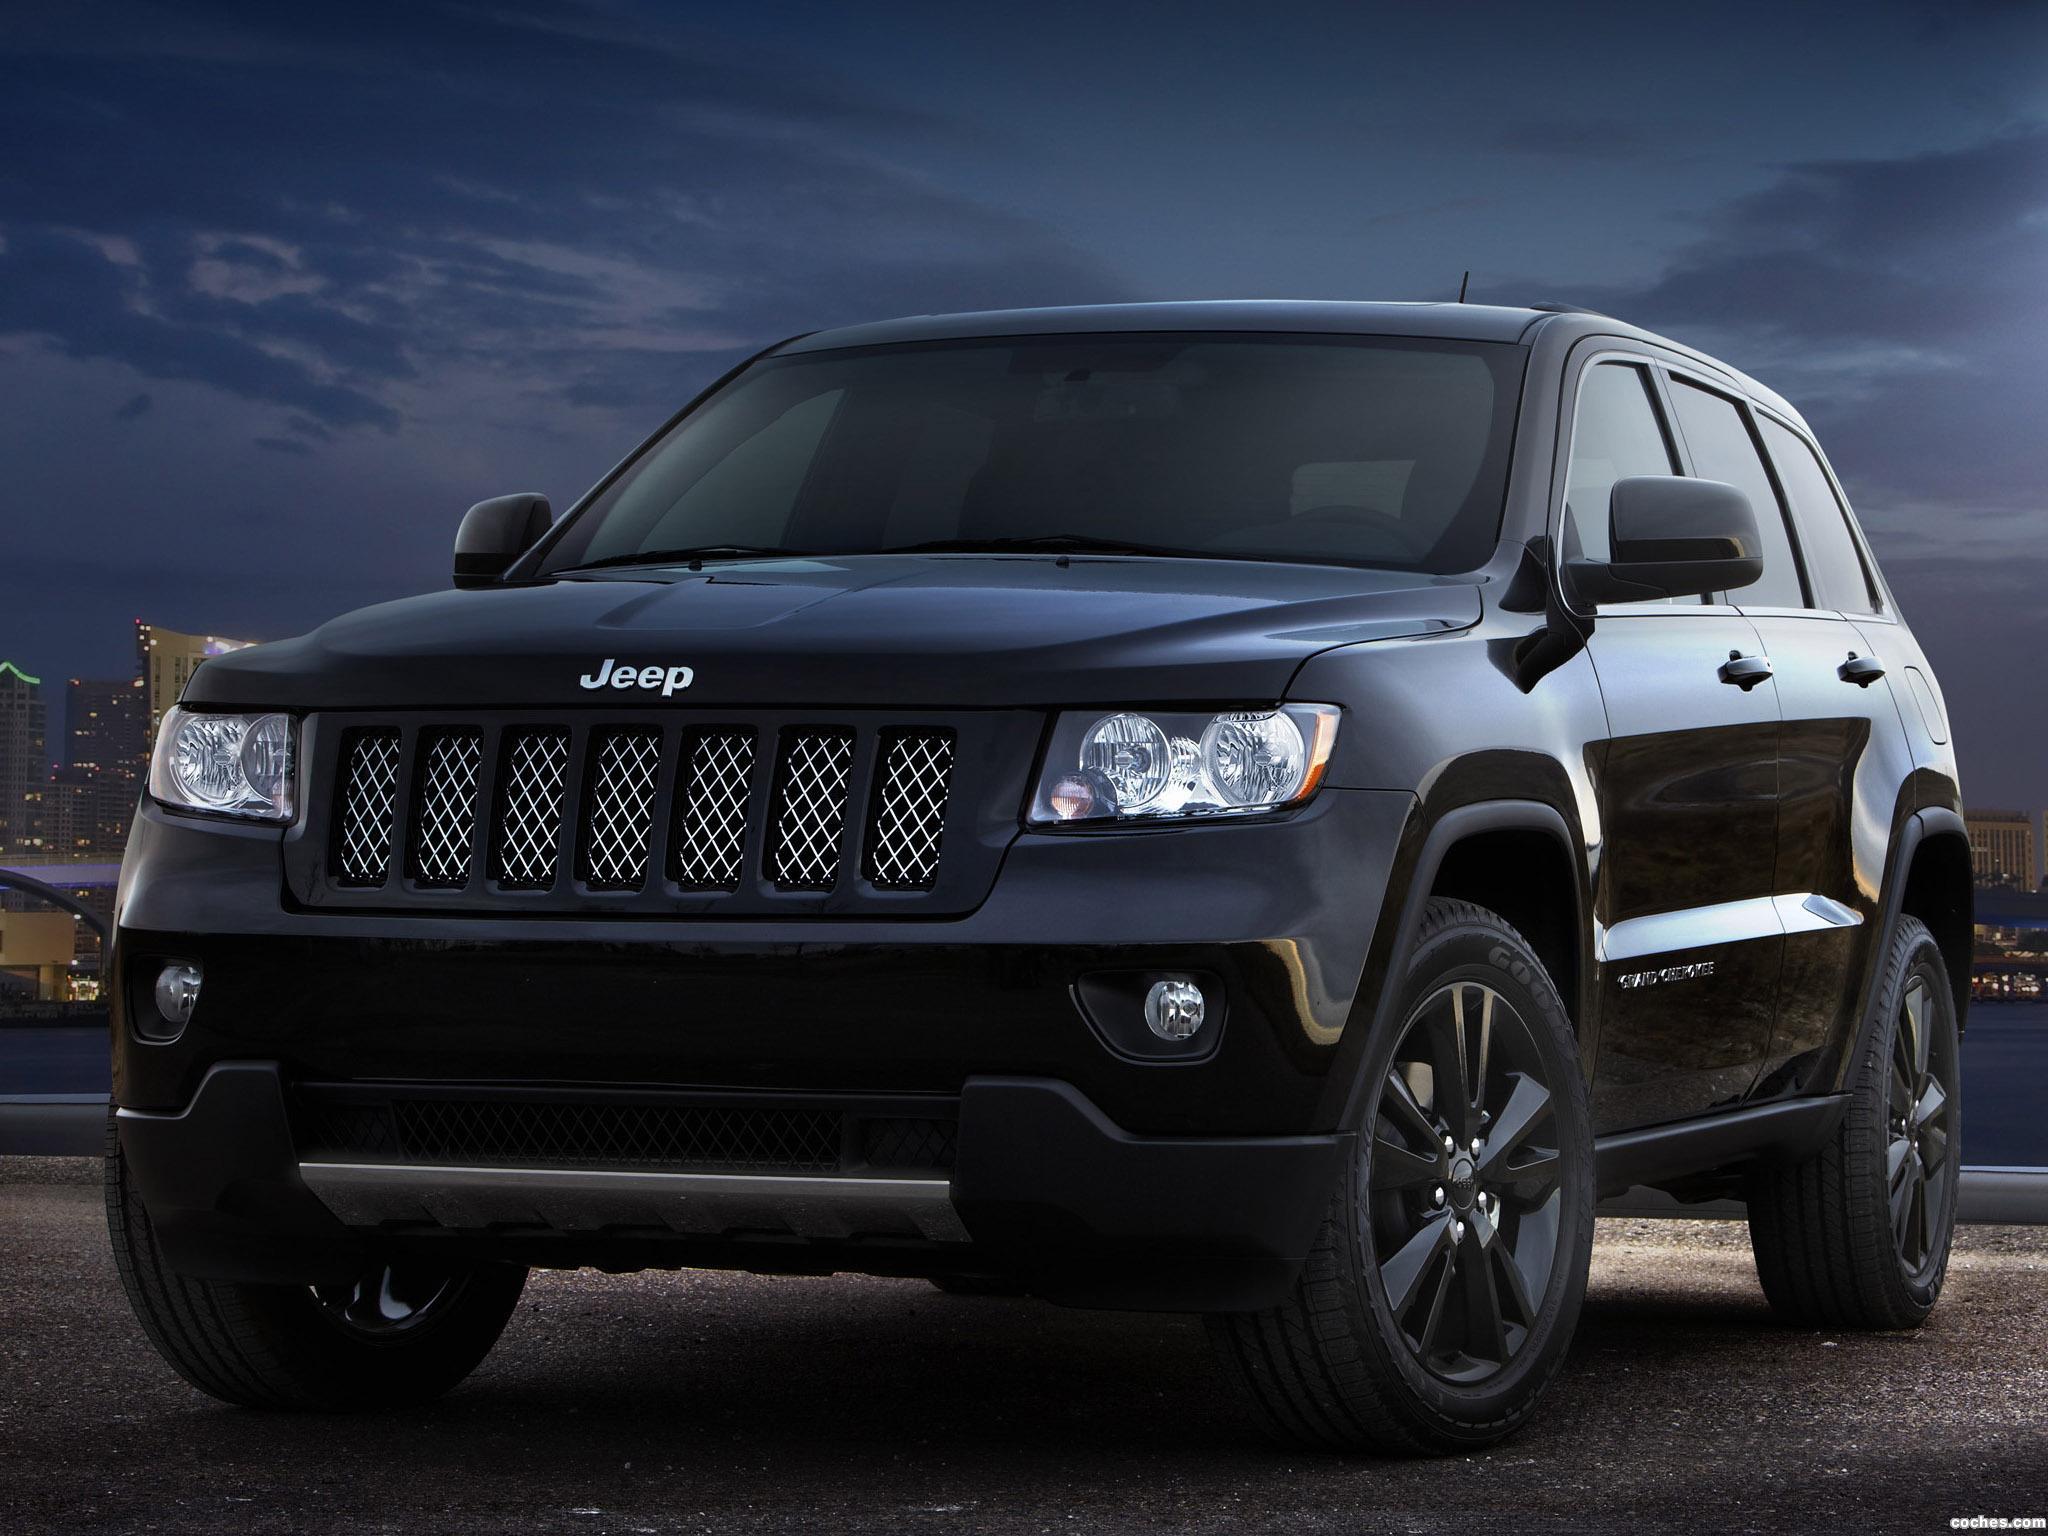 jeep_grand-cherokee-production-intent-concept-2012_r10